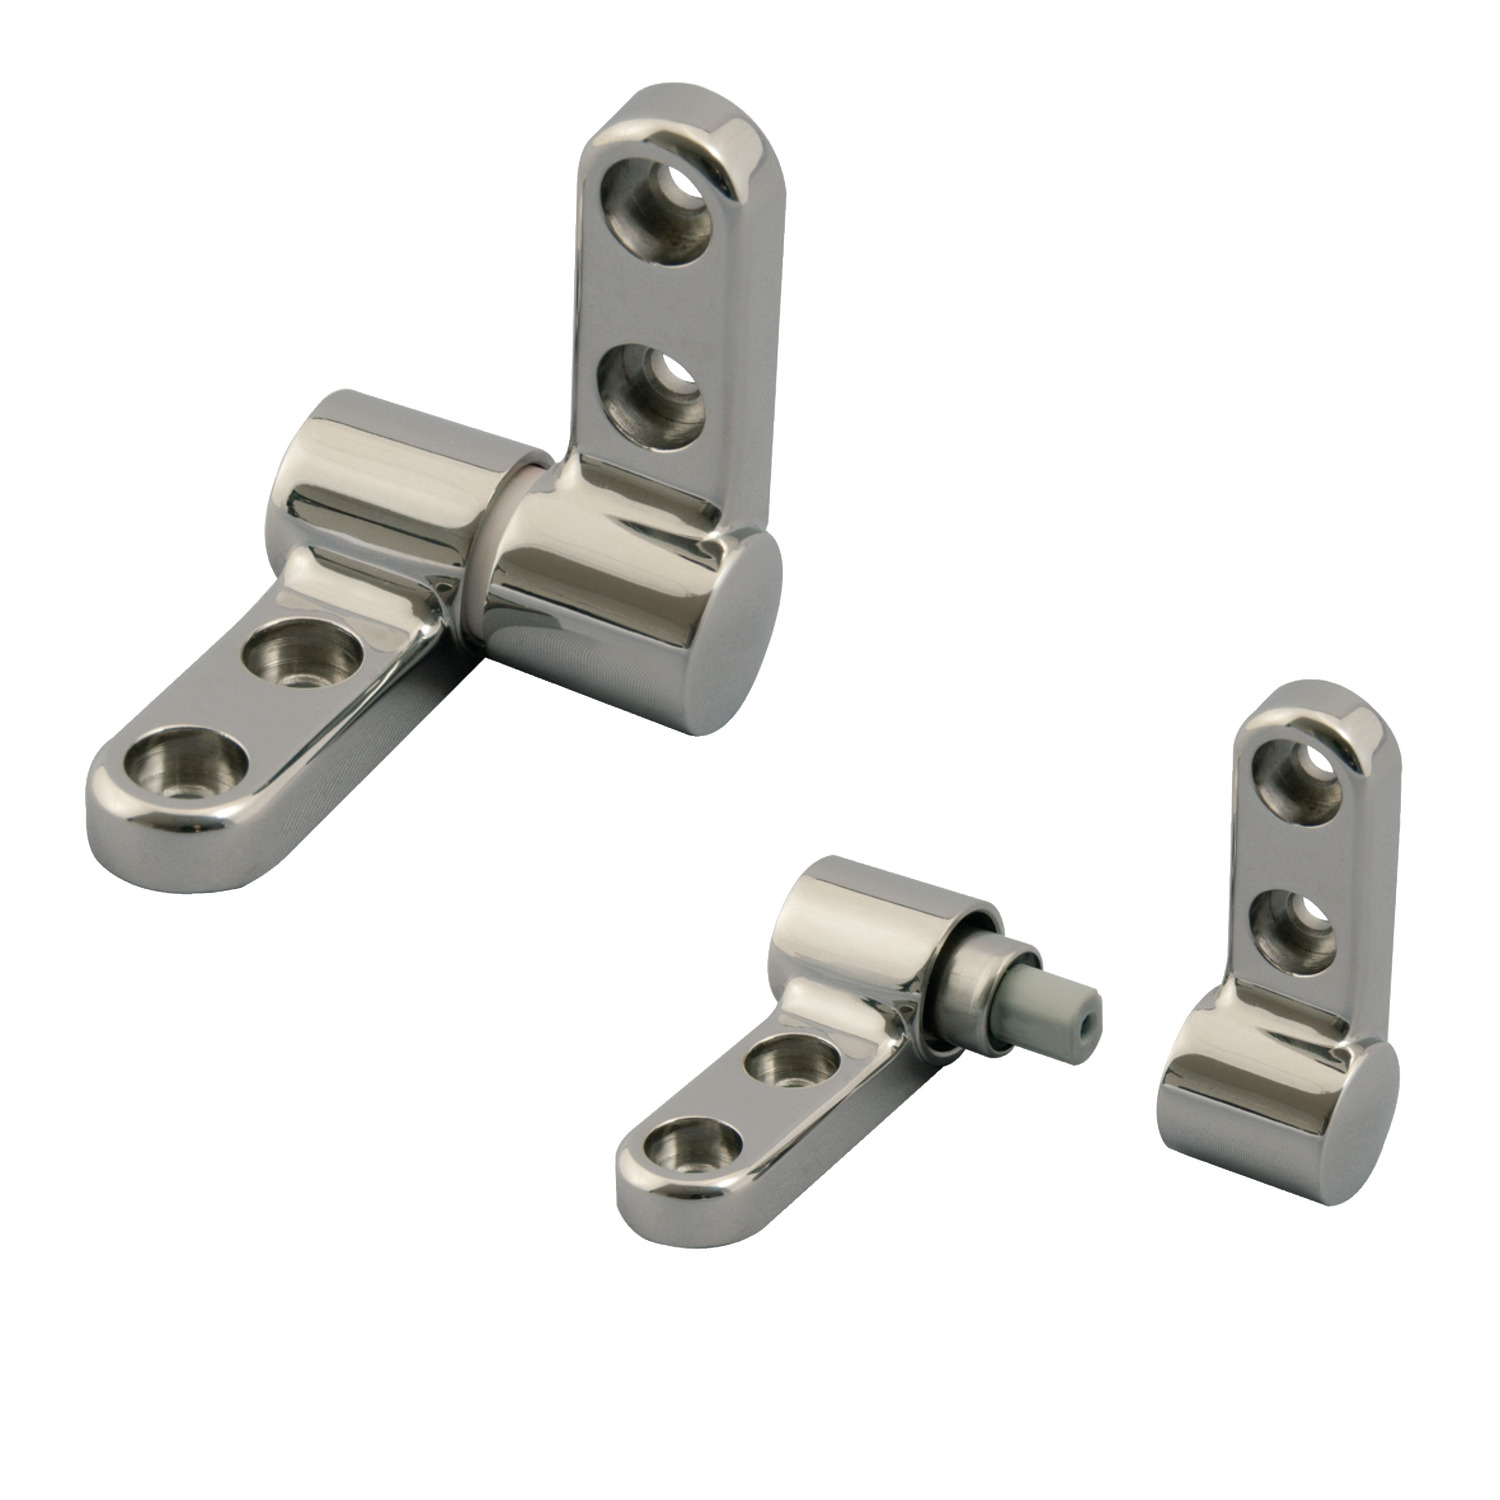 Soft Closing Hinge Set - Complete Complete soft closing hinge set with torque dampers. 115° operating angle.